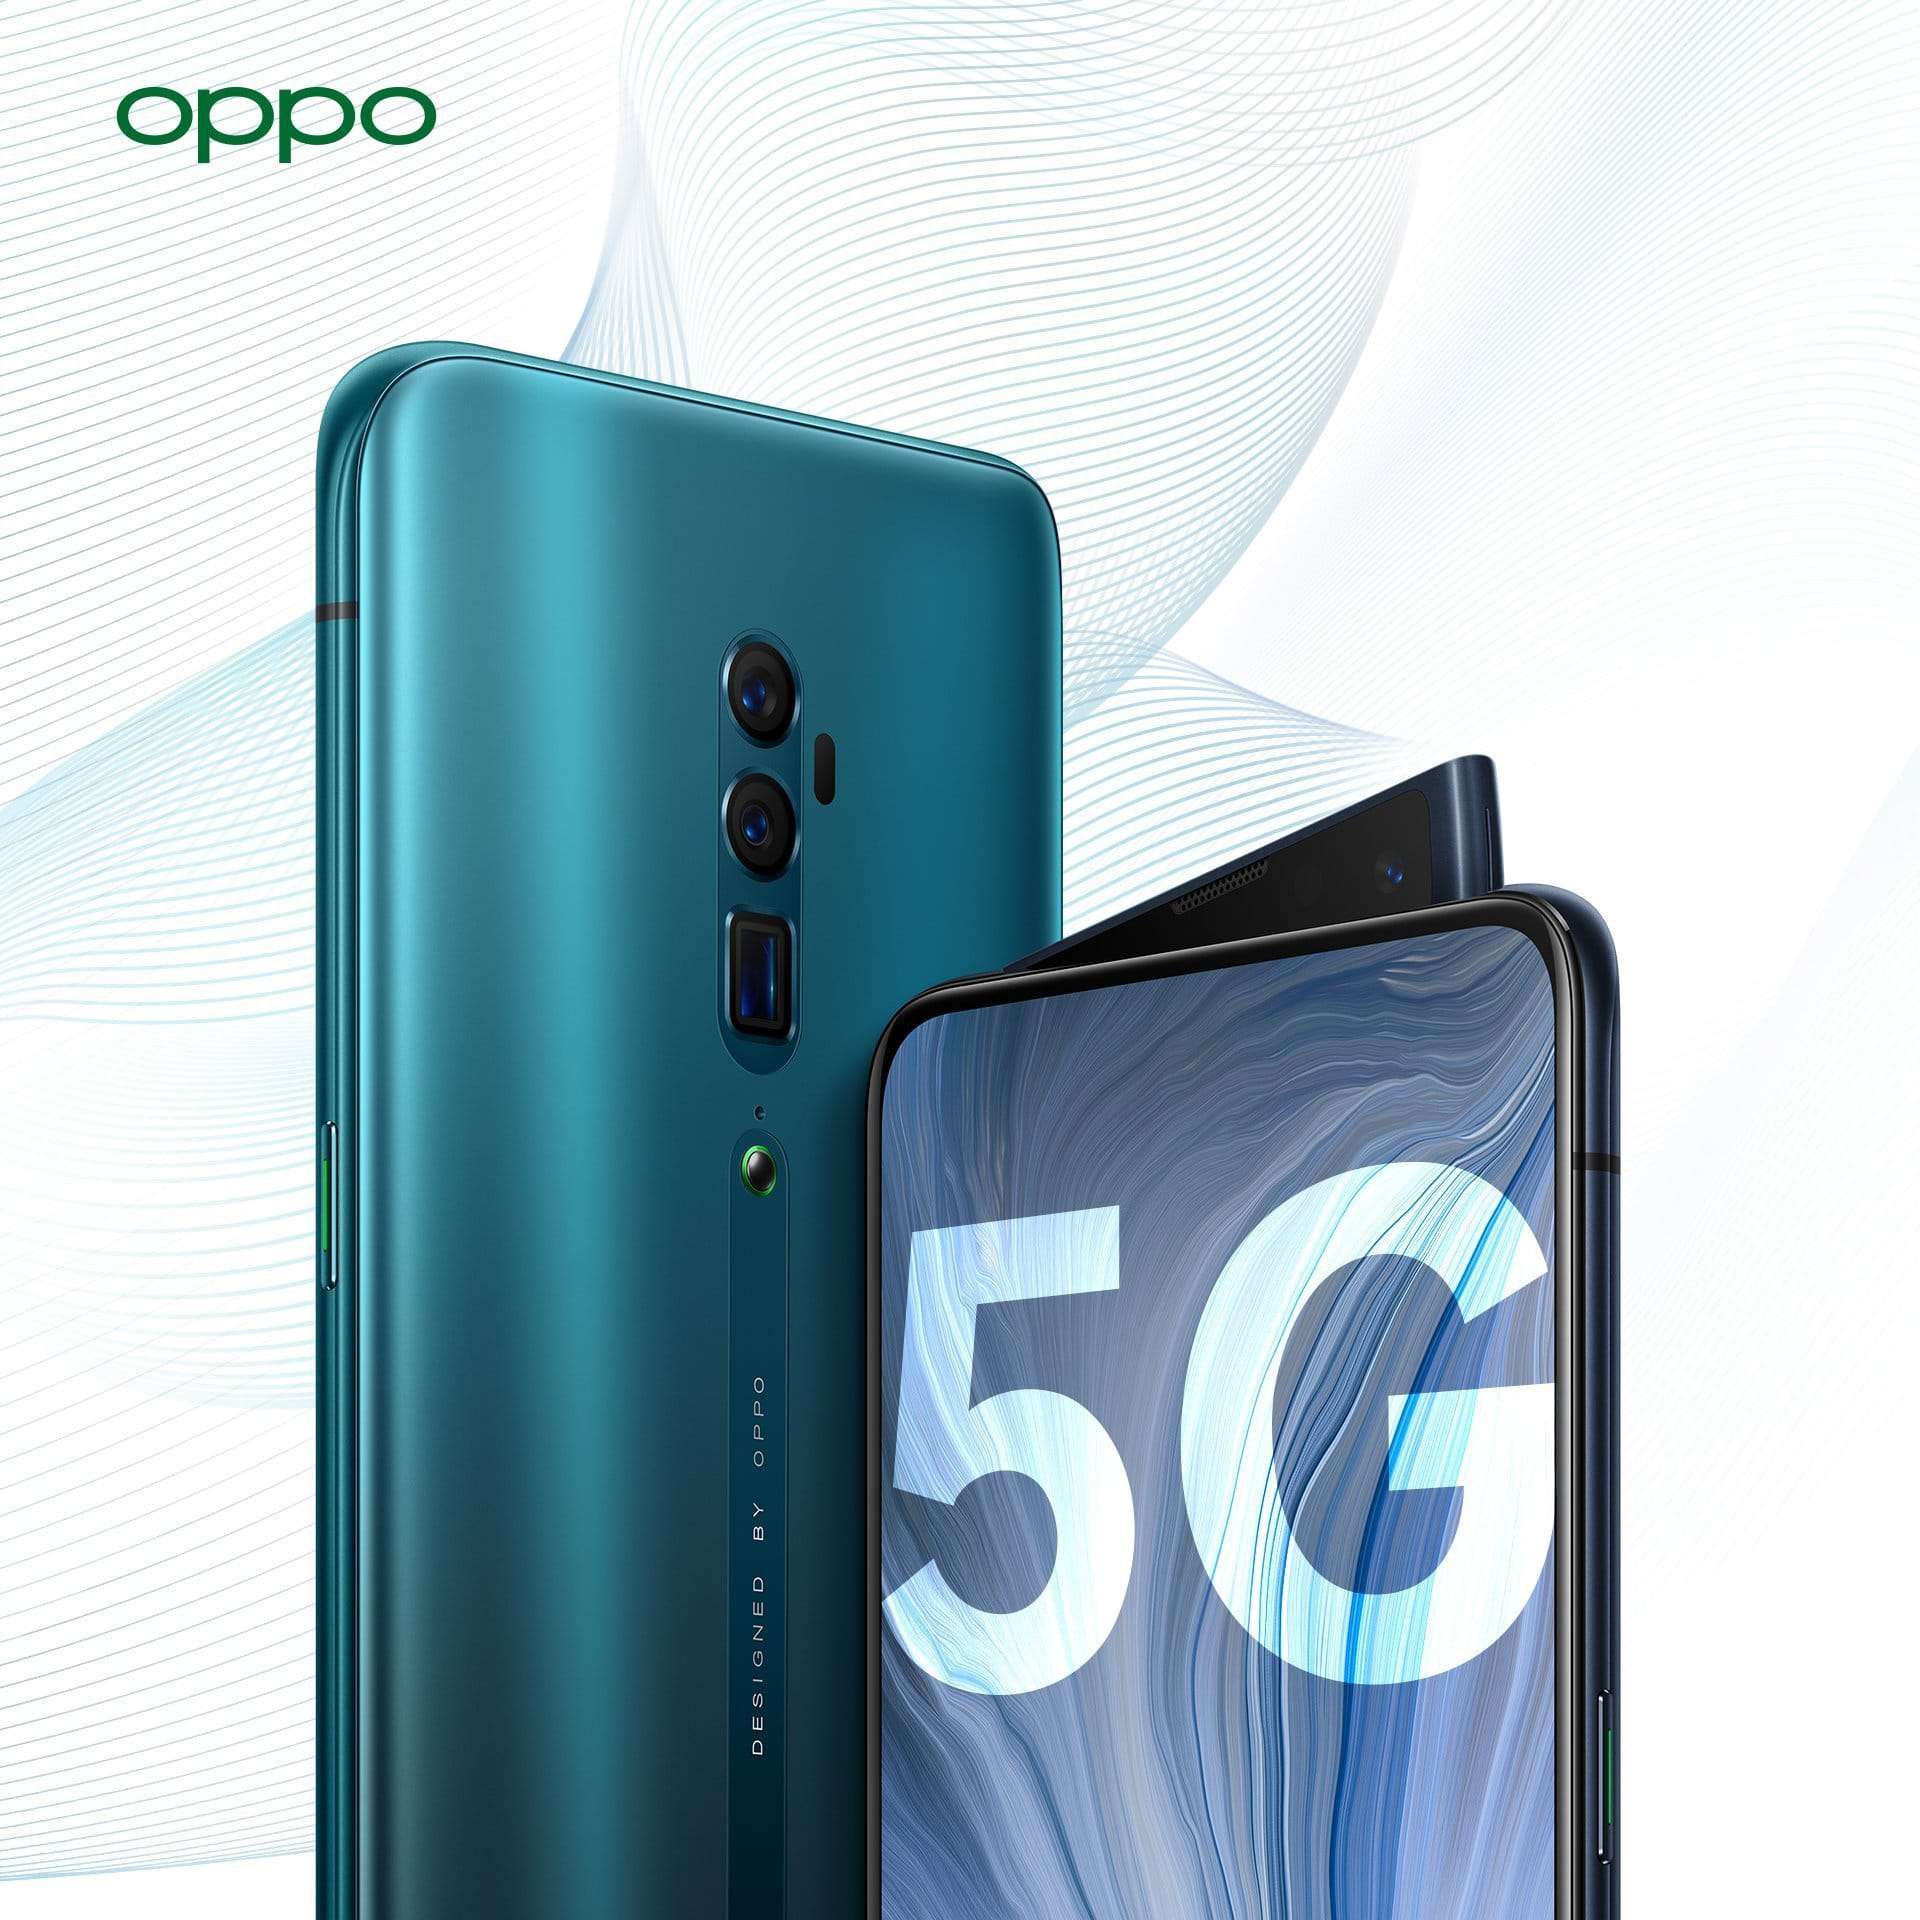 Oppo to launch dual-mode 5G smartphone